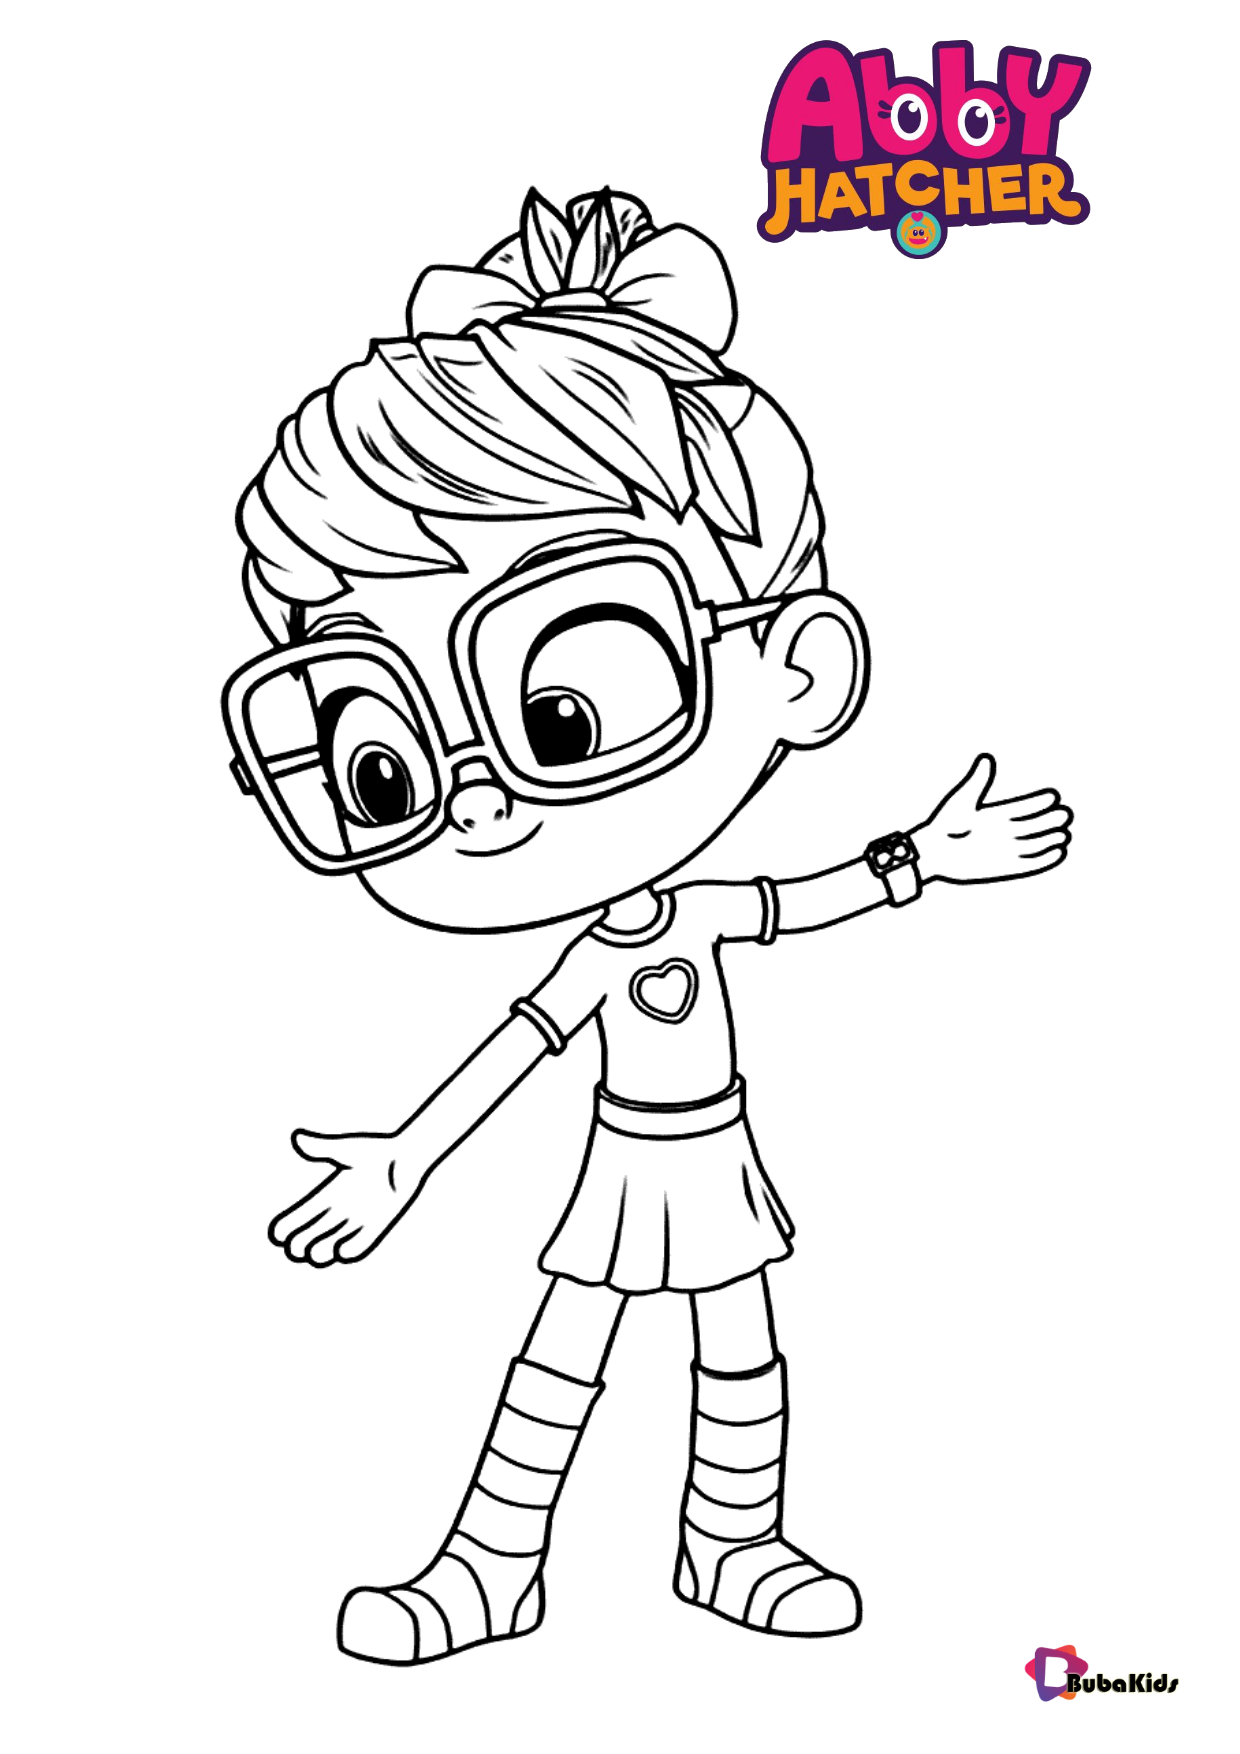 Abby Hatcher Nick jr television series coloring page Wallpaper